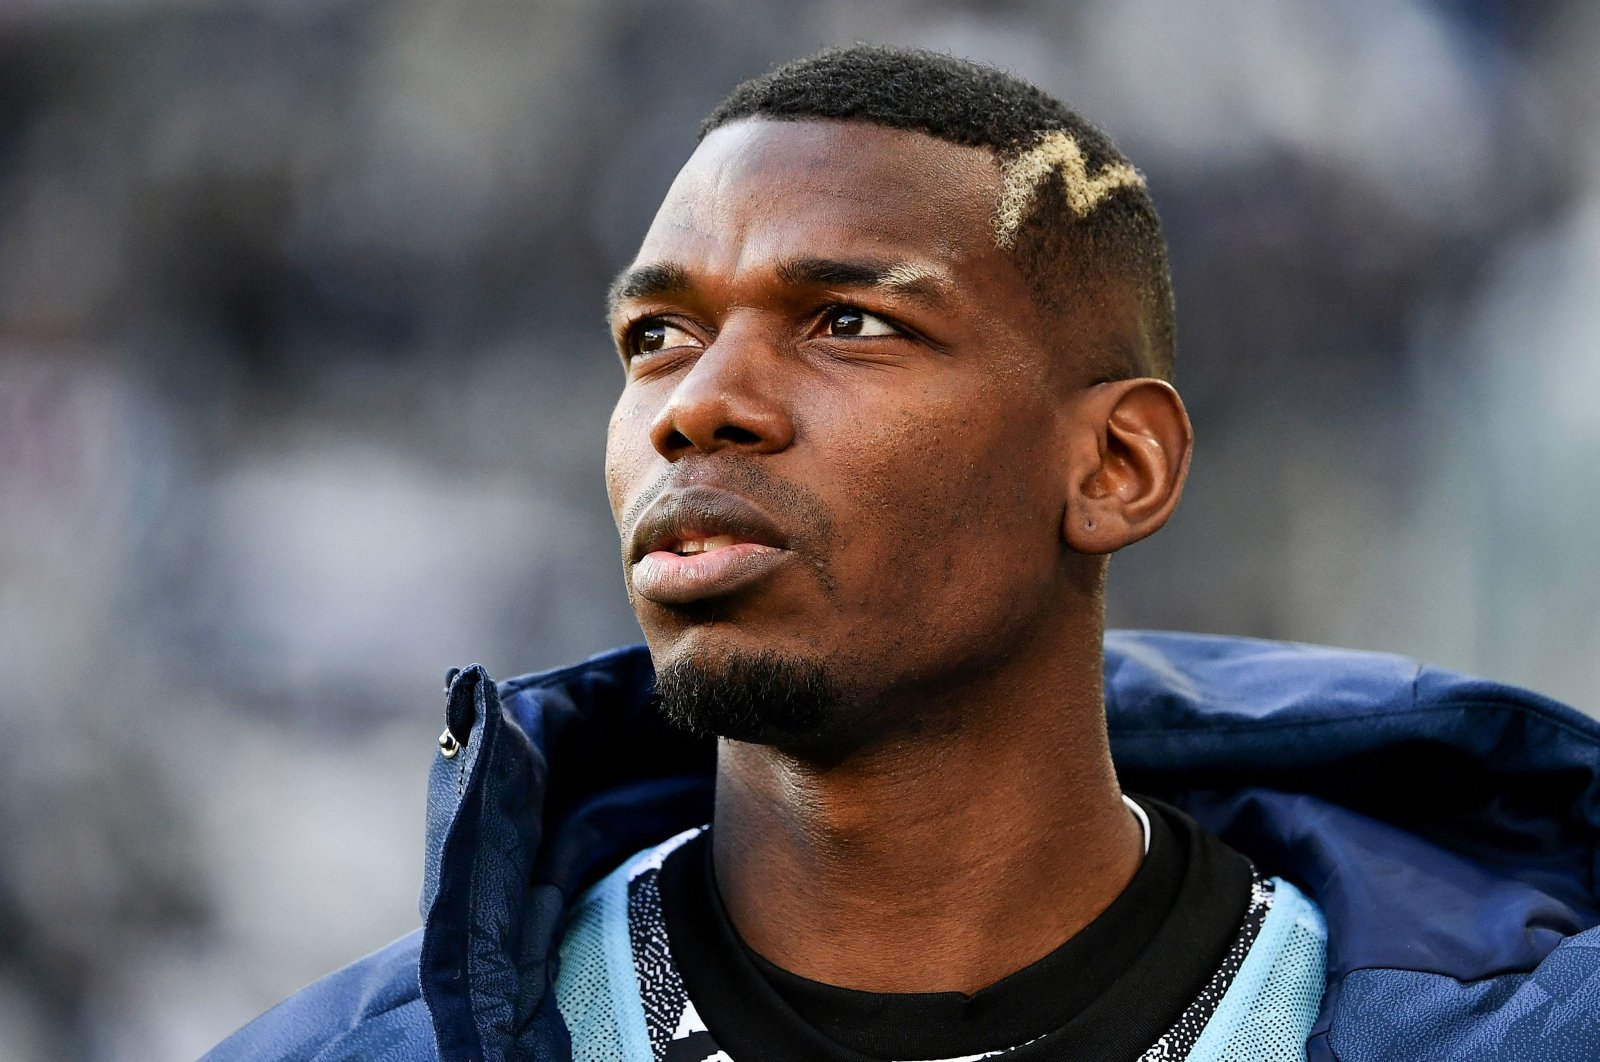 Juventus&#039; French midfielder Paul Pogba looks on prior to the Italian Serie A football match against Monza at the Juventus Stadium, Turin, Italy, Jan. 29, 2023. (AFP Photo)